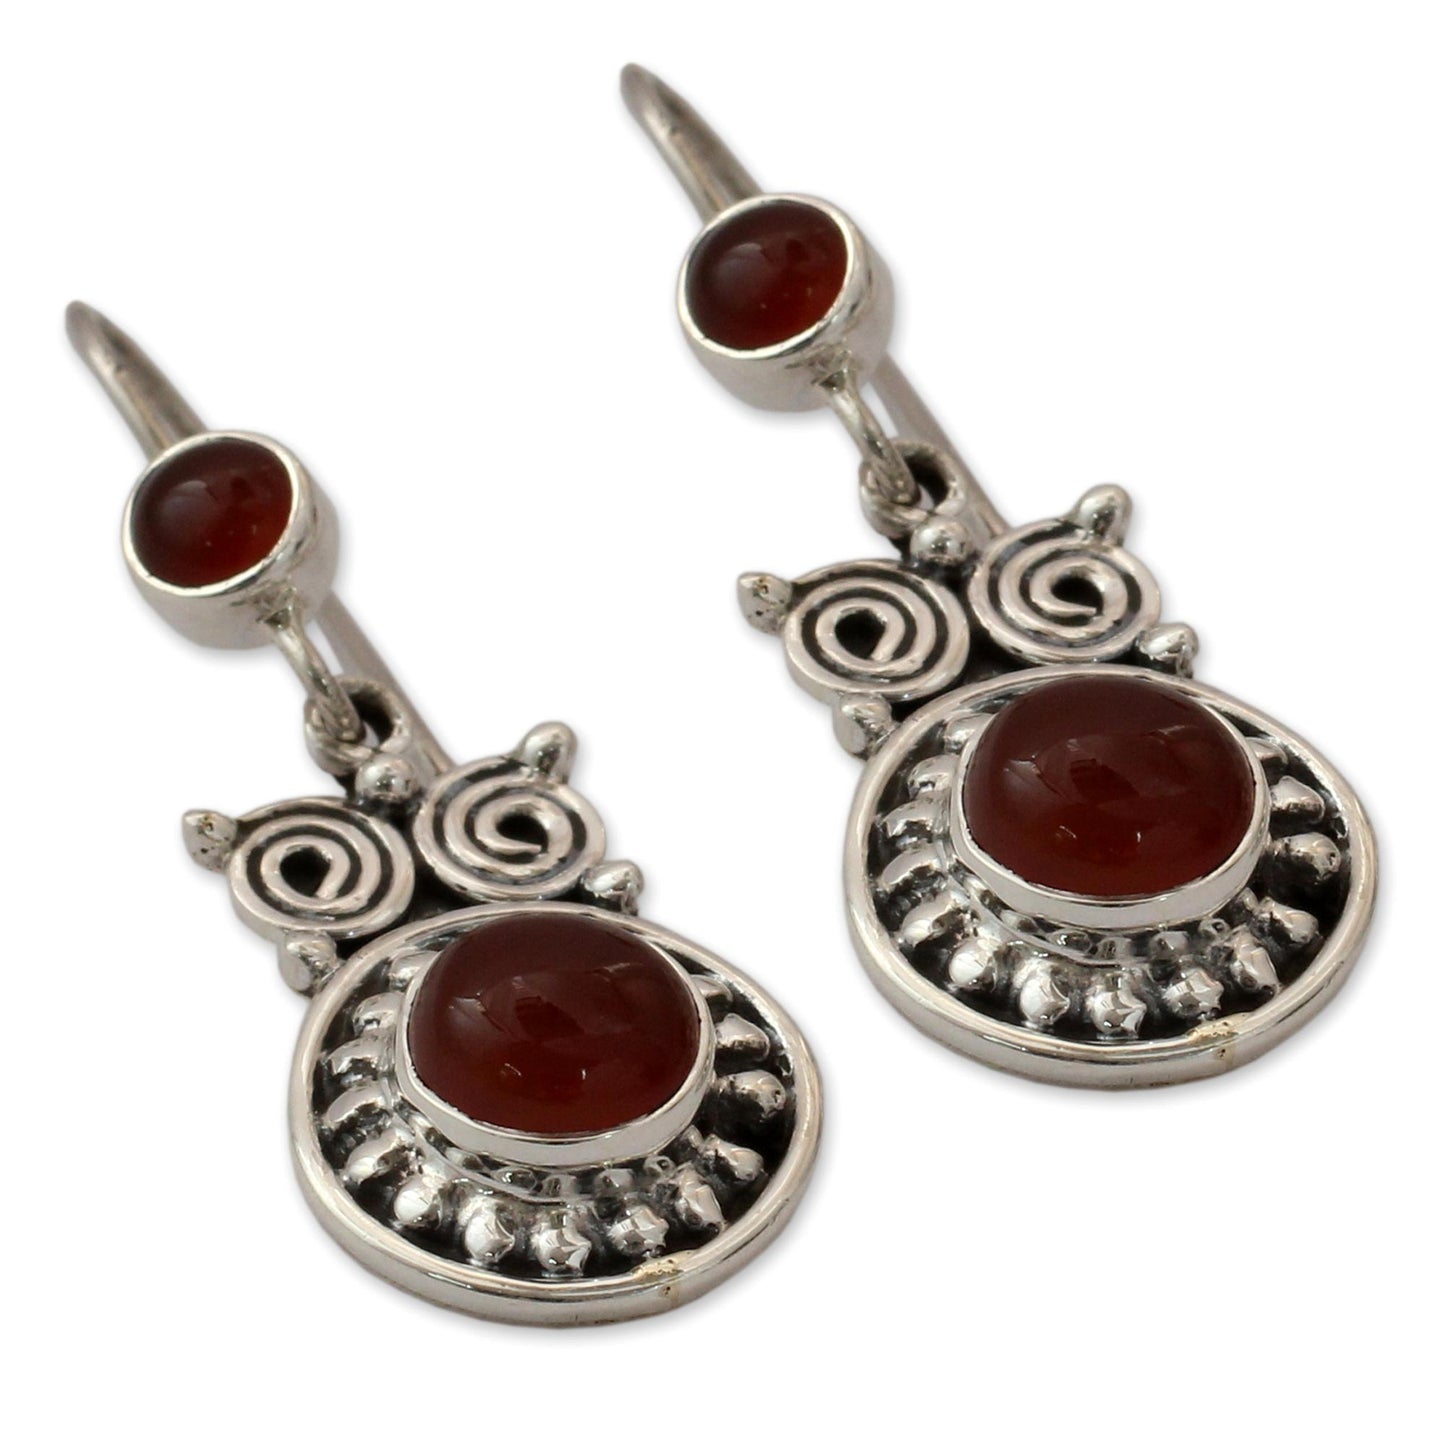 Fire Owl Handcrafted Indian Sterling Silver and Carnelian Earrings